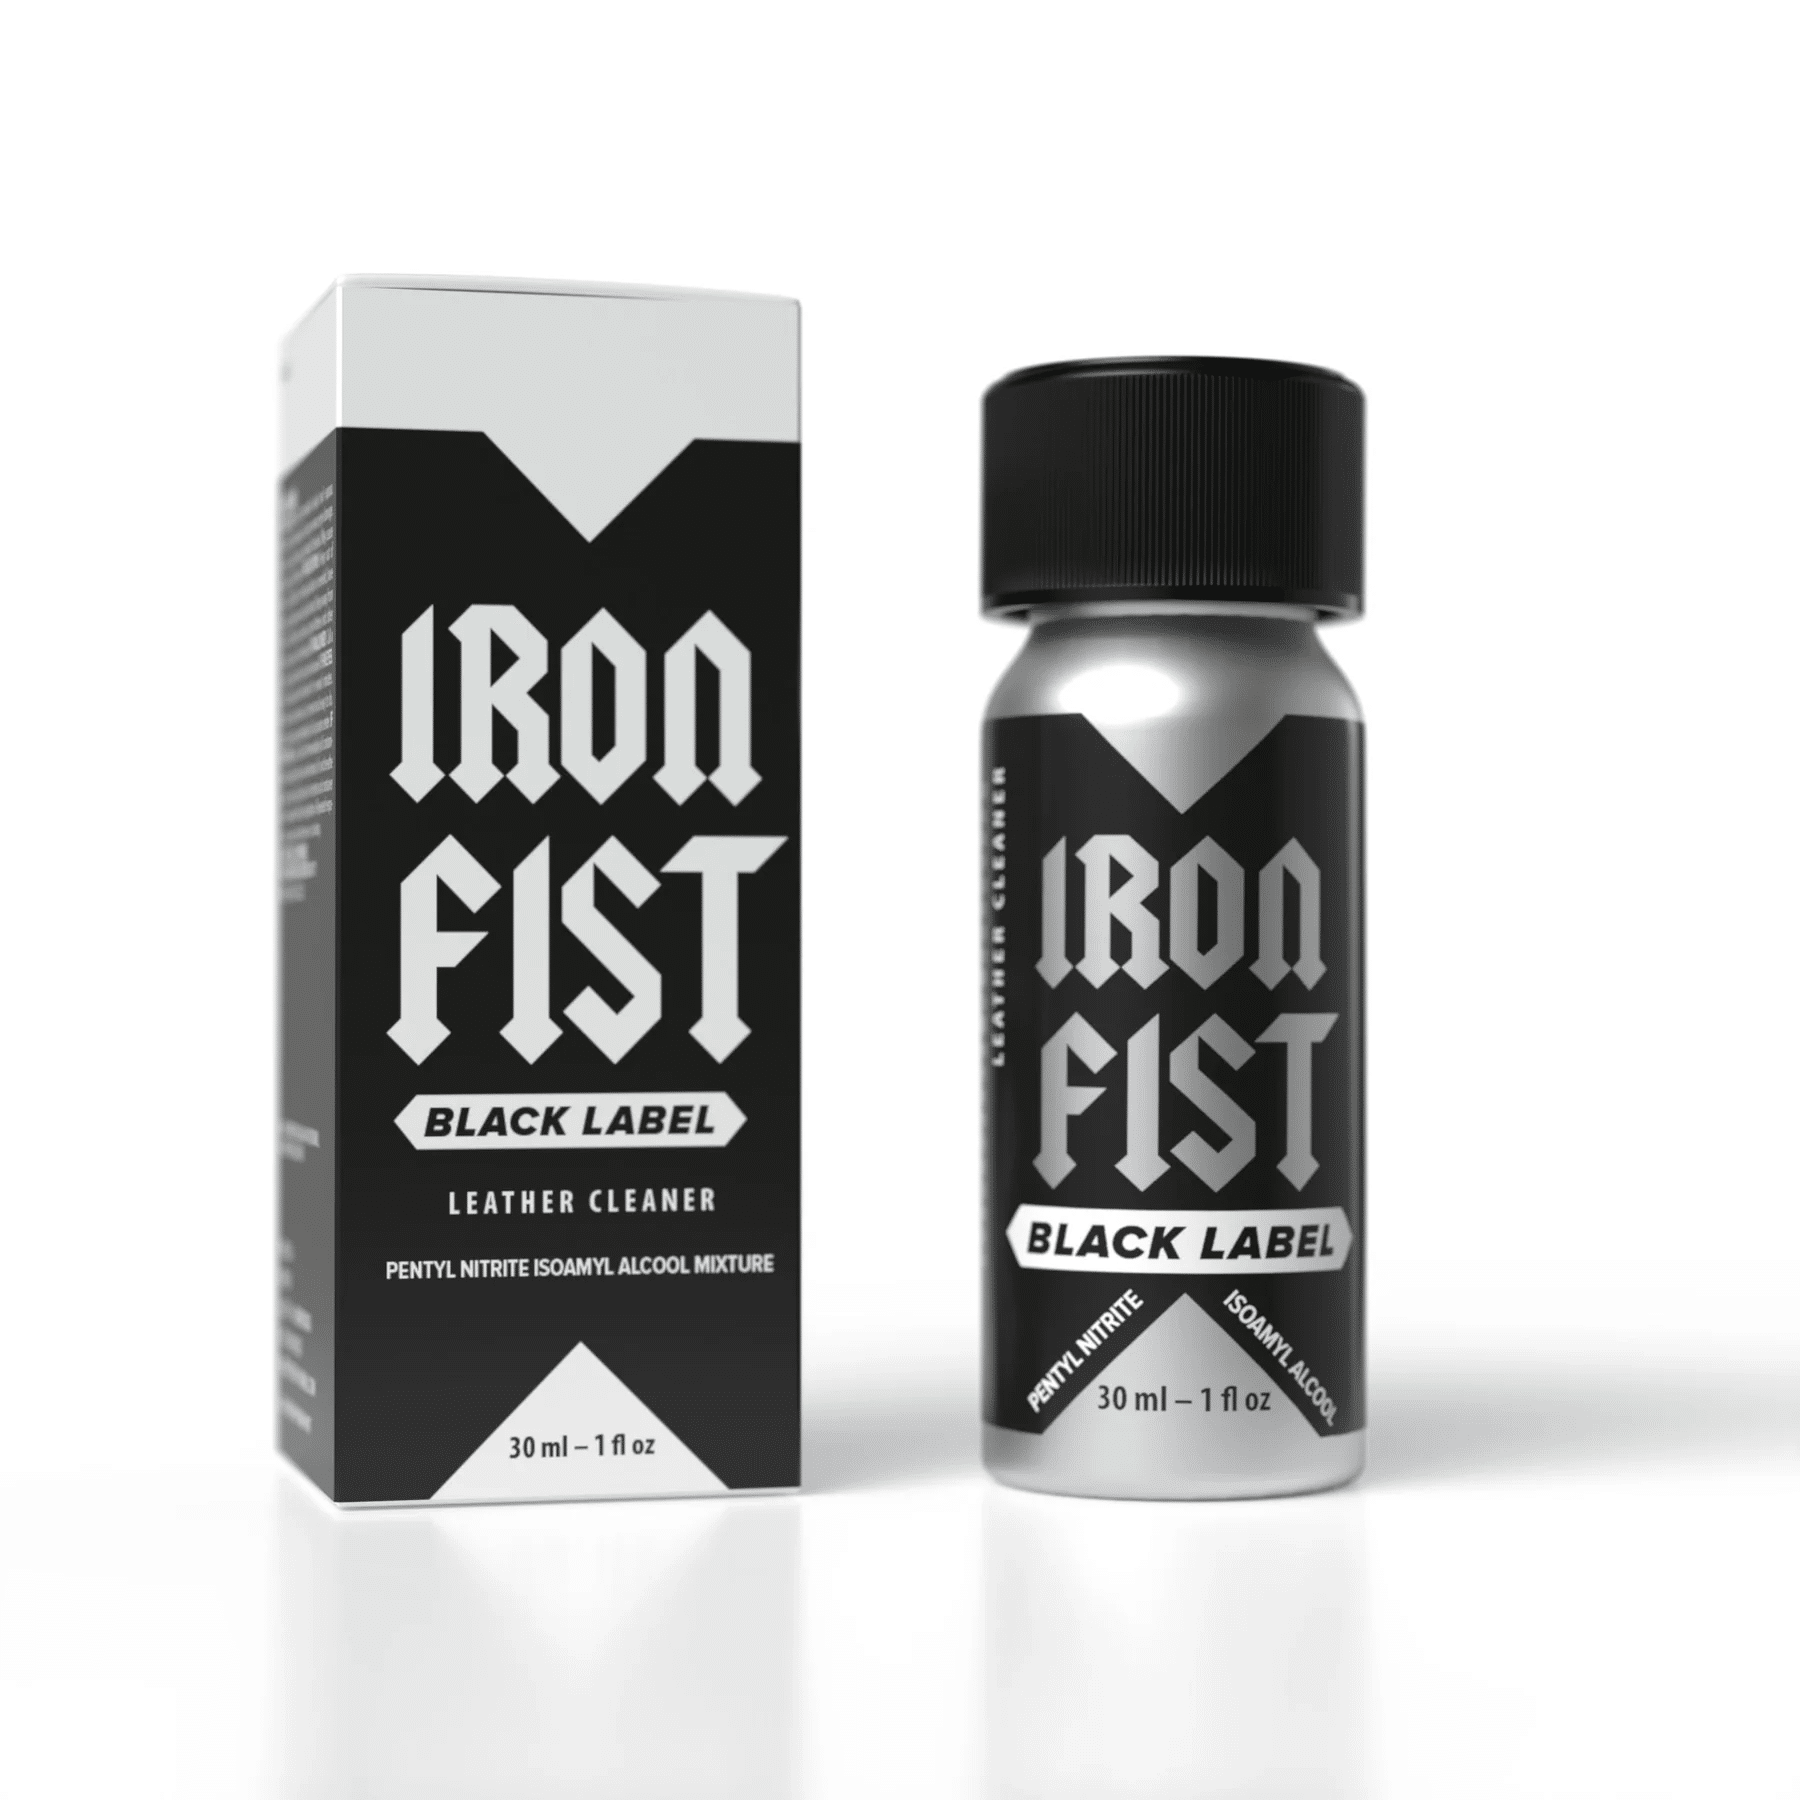 A bottle and box of "iron fist black label leather cleaner" with a sleek, monochromatic design, indicating a product intended for the maintenance and cleaning of leather items.